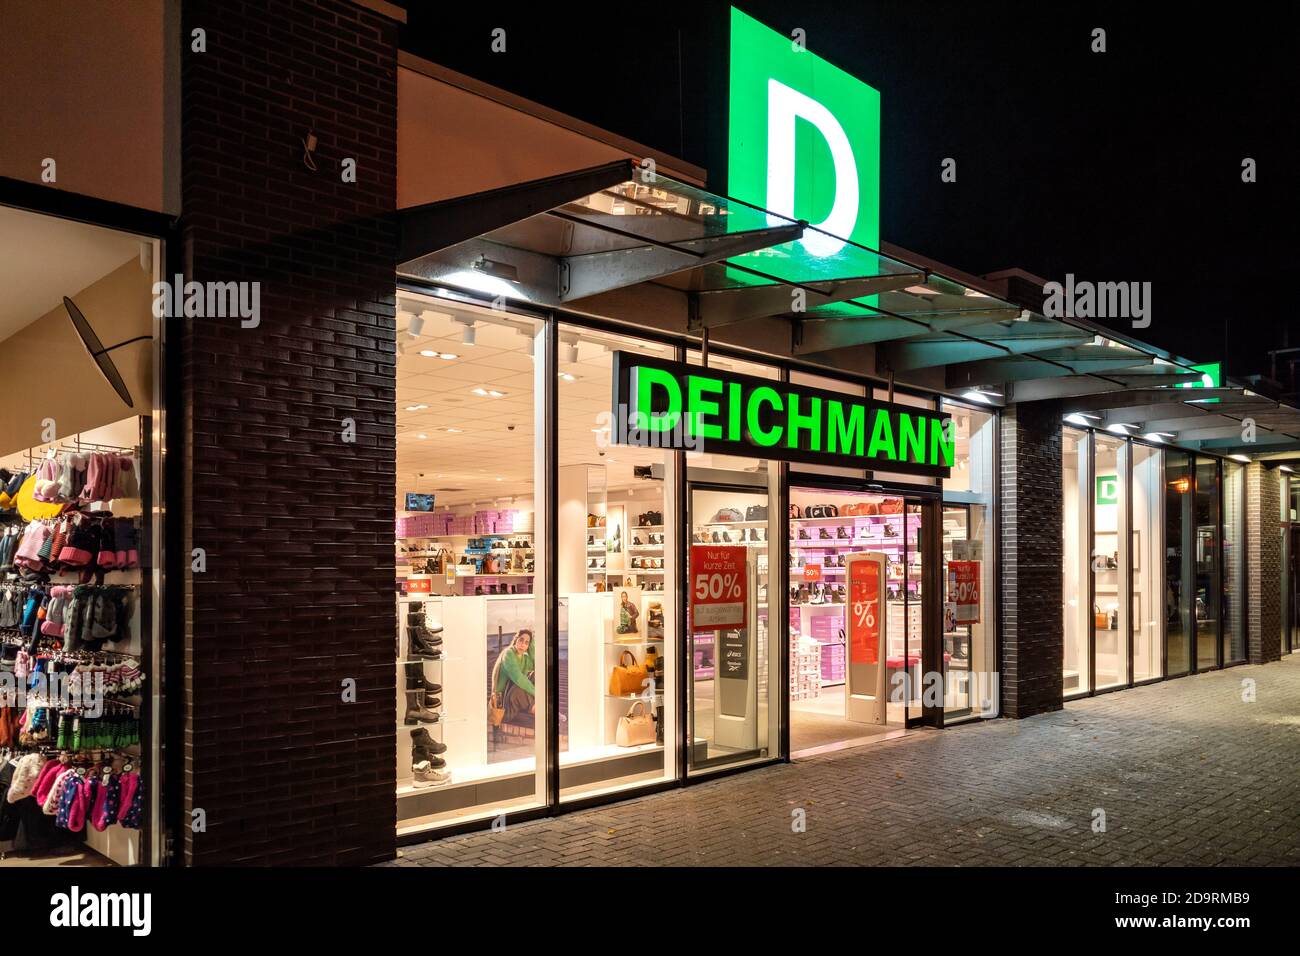 Deichmann Se High Resolution Stock Photography and Images Alamy